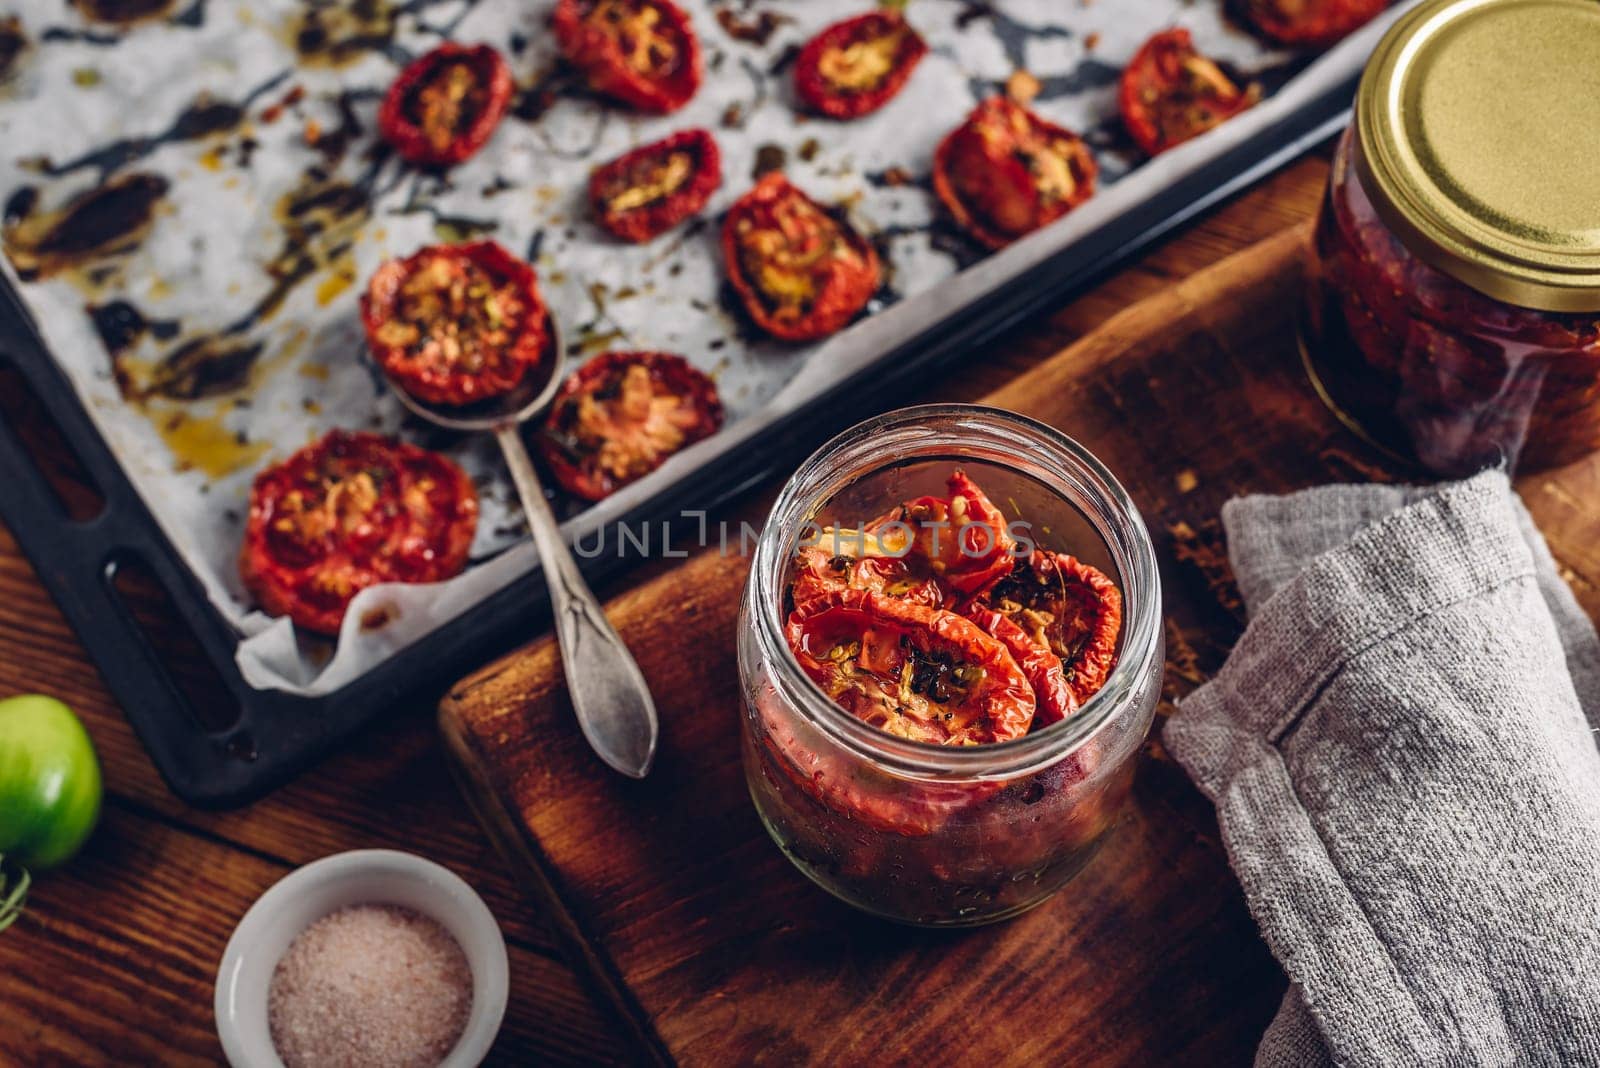 Freshly Oven Baked Tomatoes with Thyme, Garlic and Olive Oil Preserved in a Glass Jar by Seva_blsv